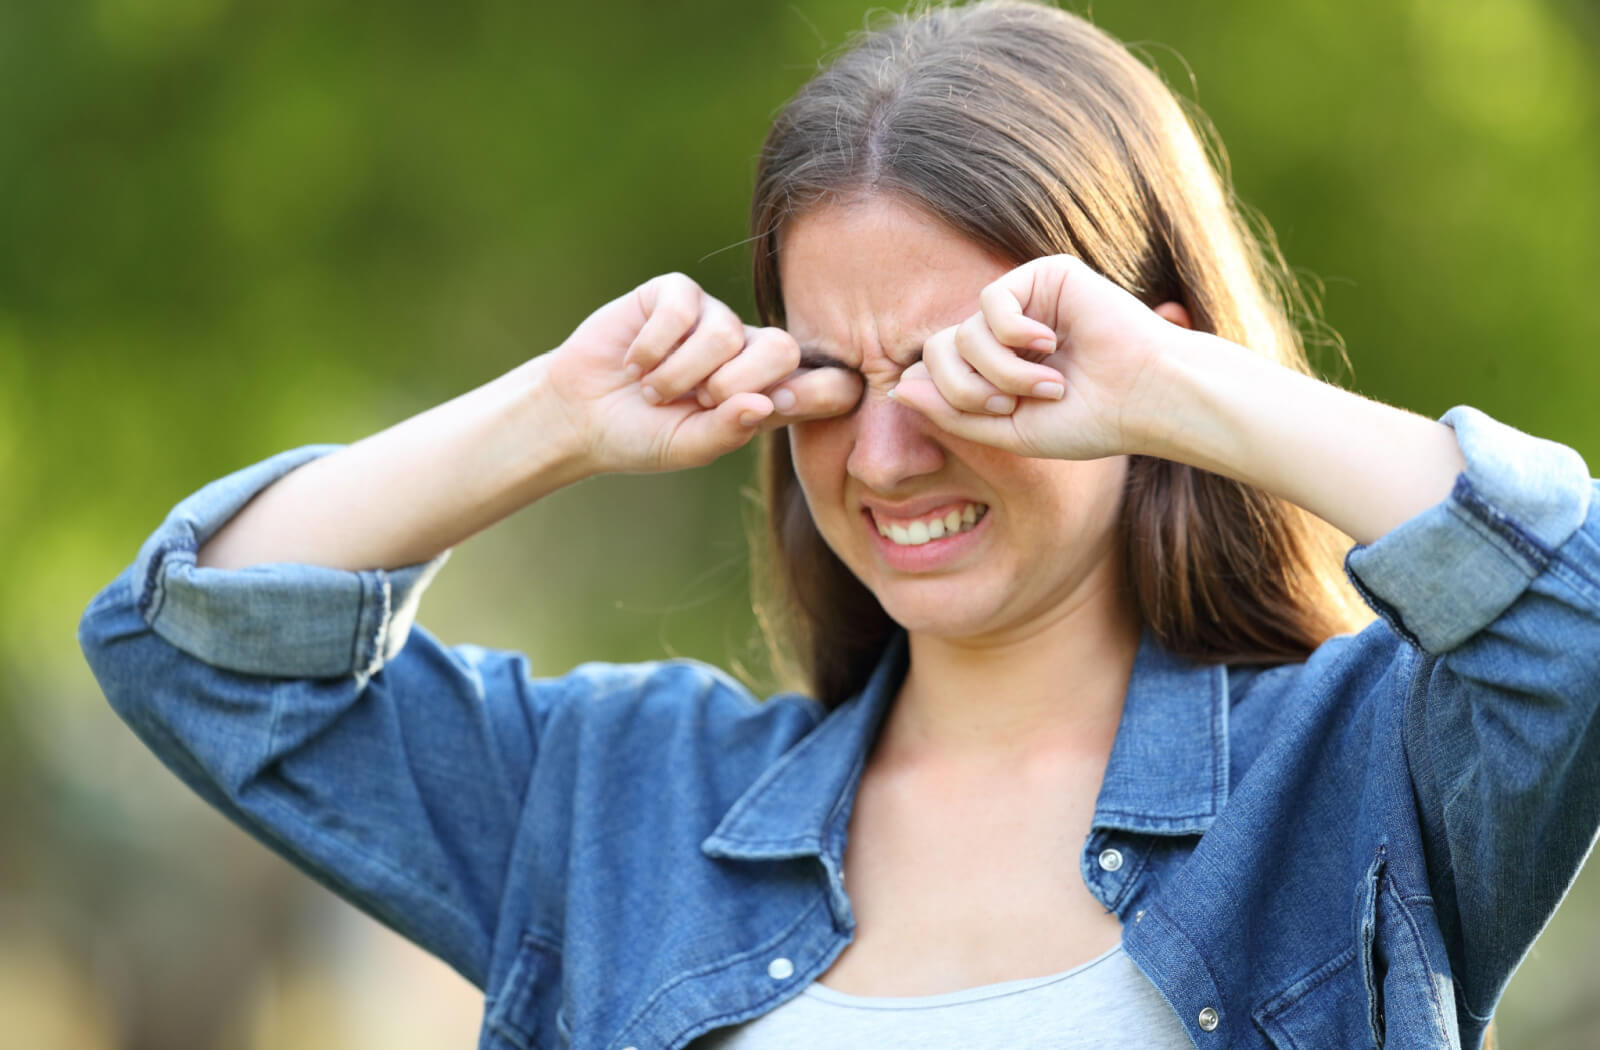 A young woman in a blue denim shirt is rubbing  her eyes, with an uneasy look on her face.